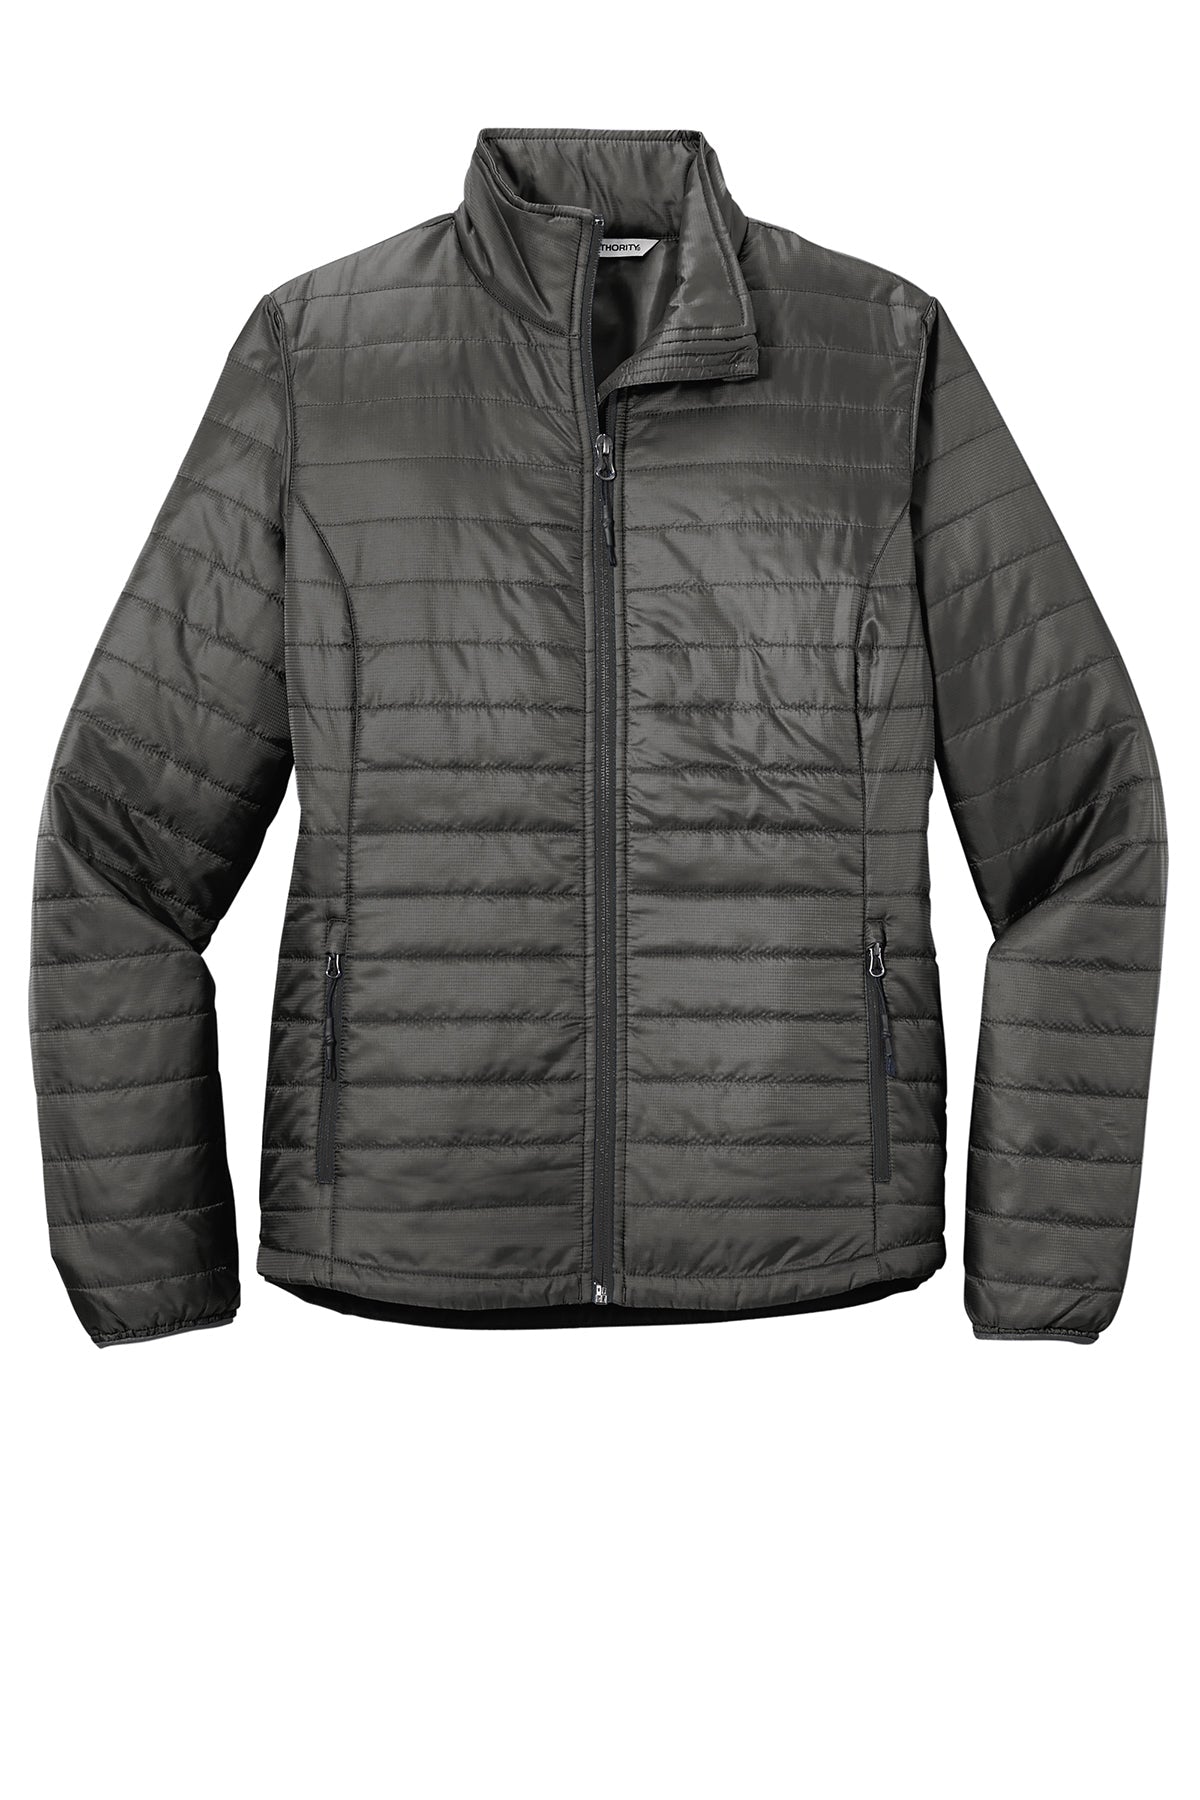 L850 Port Authority® Ladies Packable Puffy Jacket